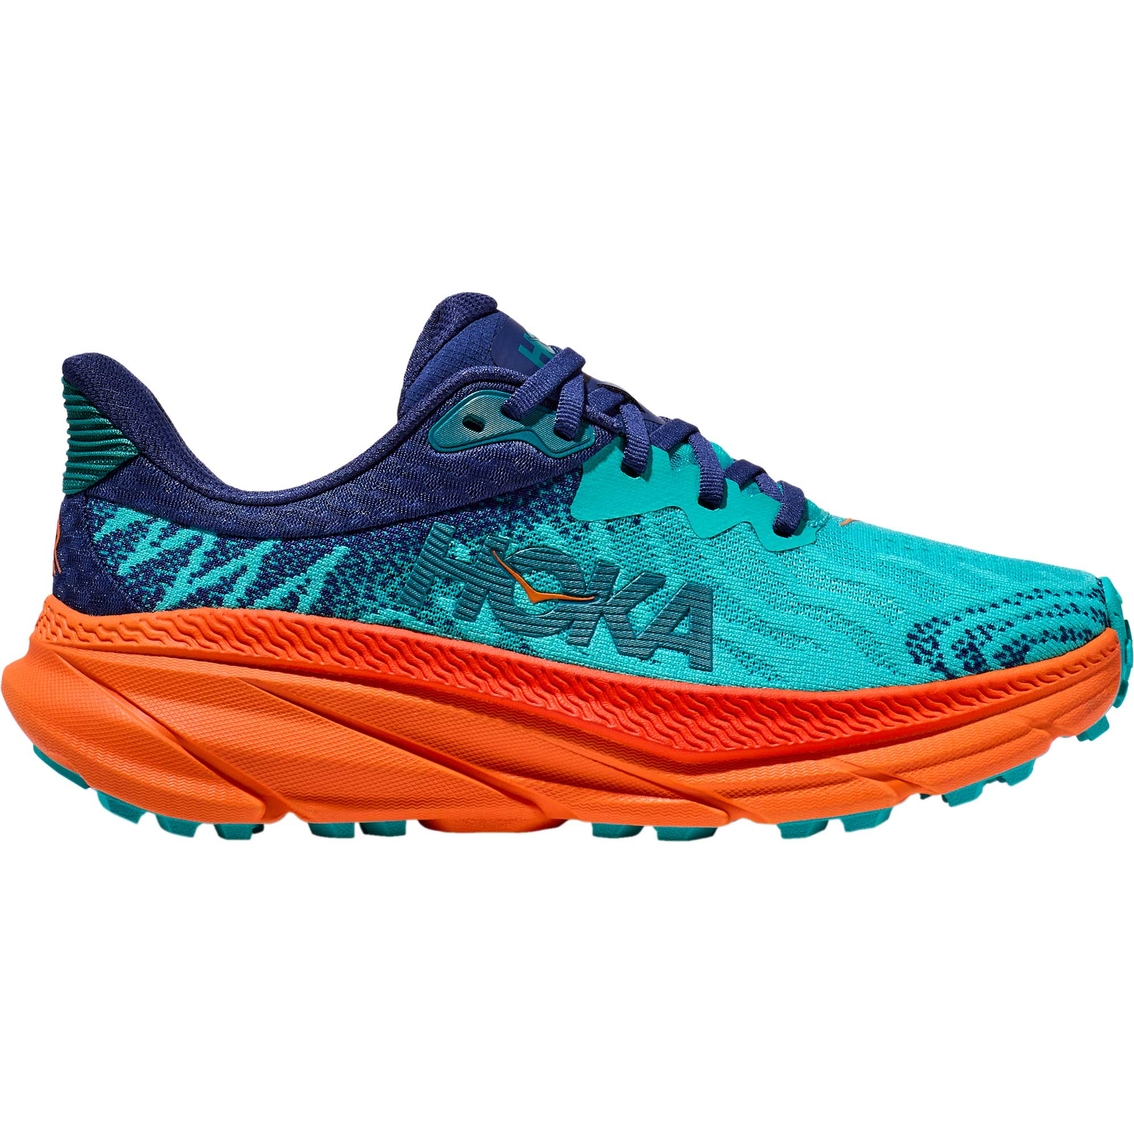 Hoka Women's Challenger 7 Running Shoes | Women's Athletic Shoes ...